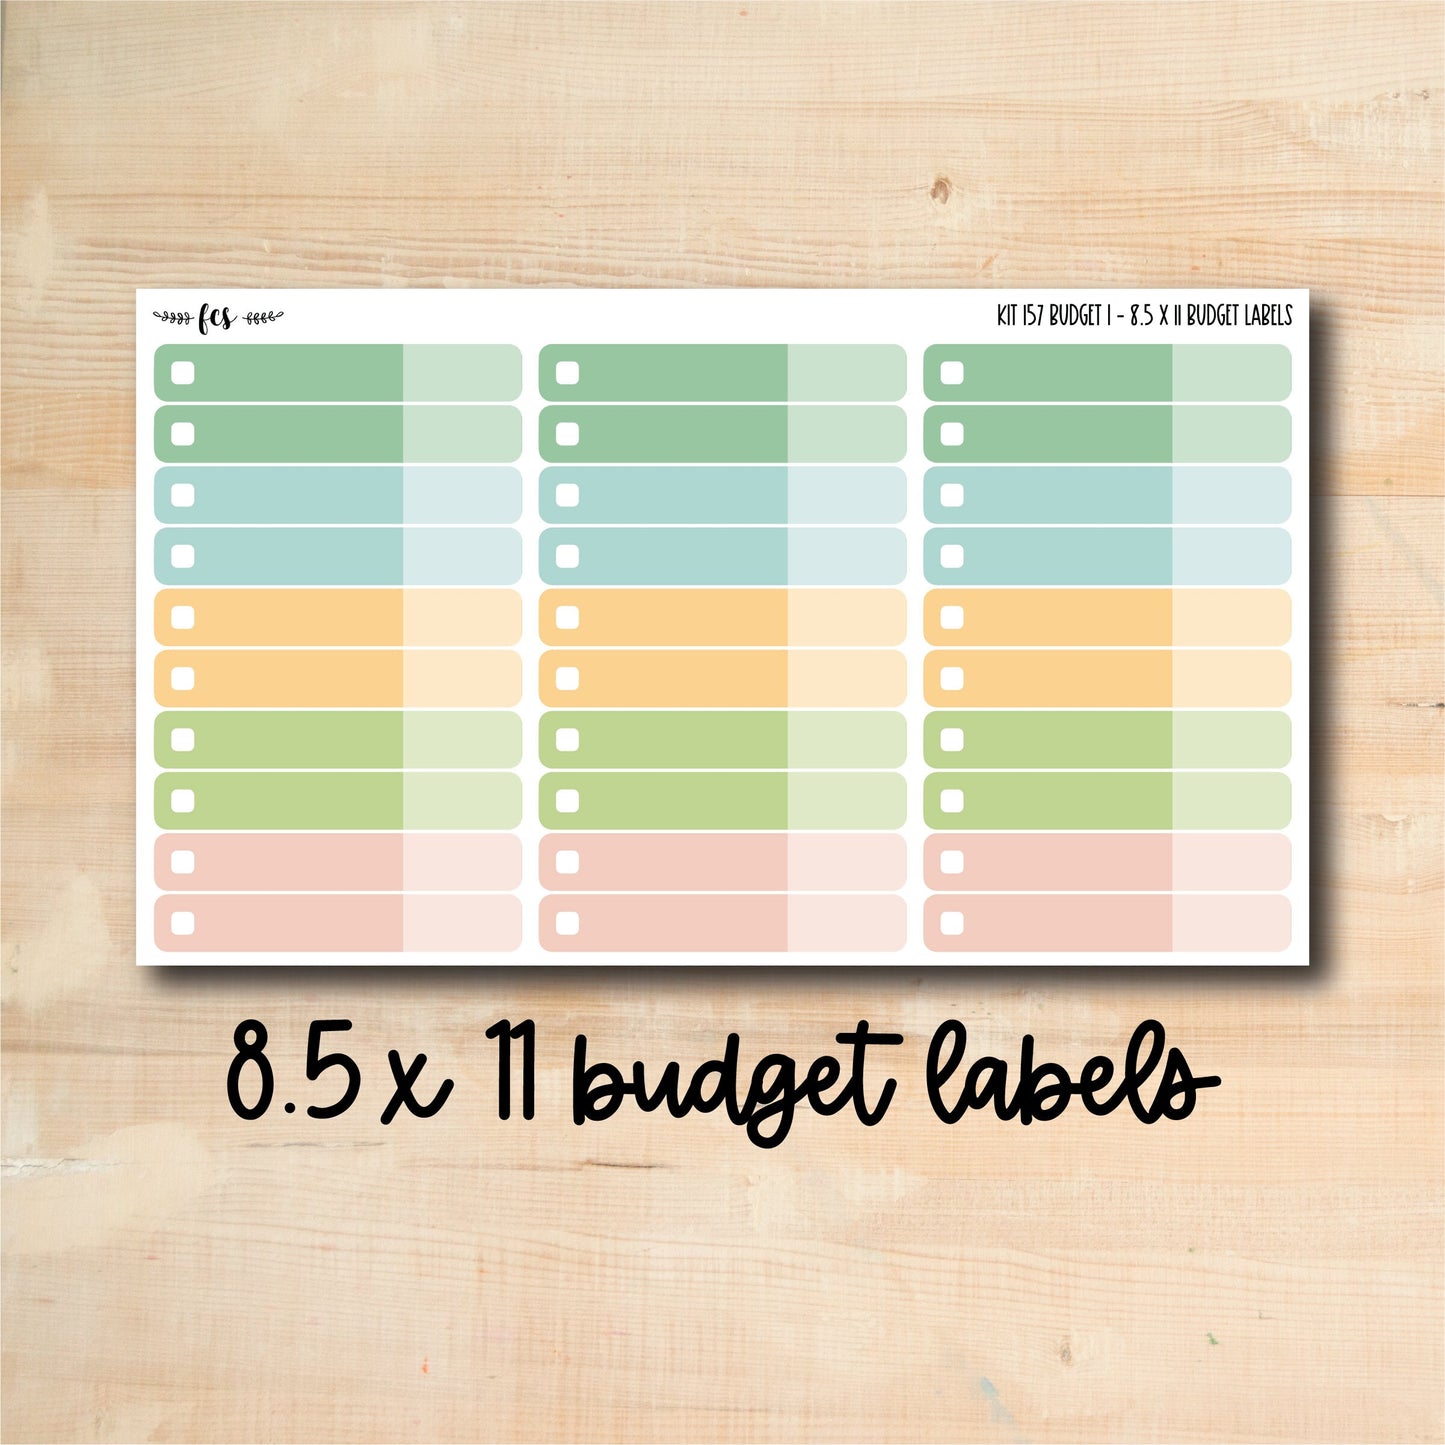 BUDGET-157 || SPRING FLOWERS 8.5x11 budget labels